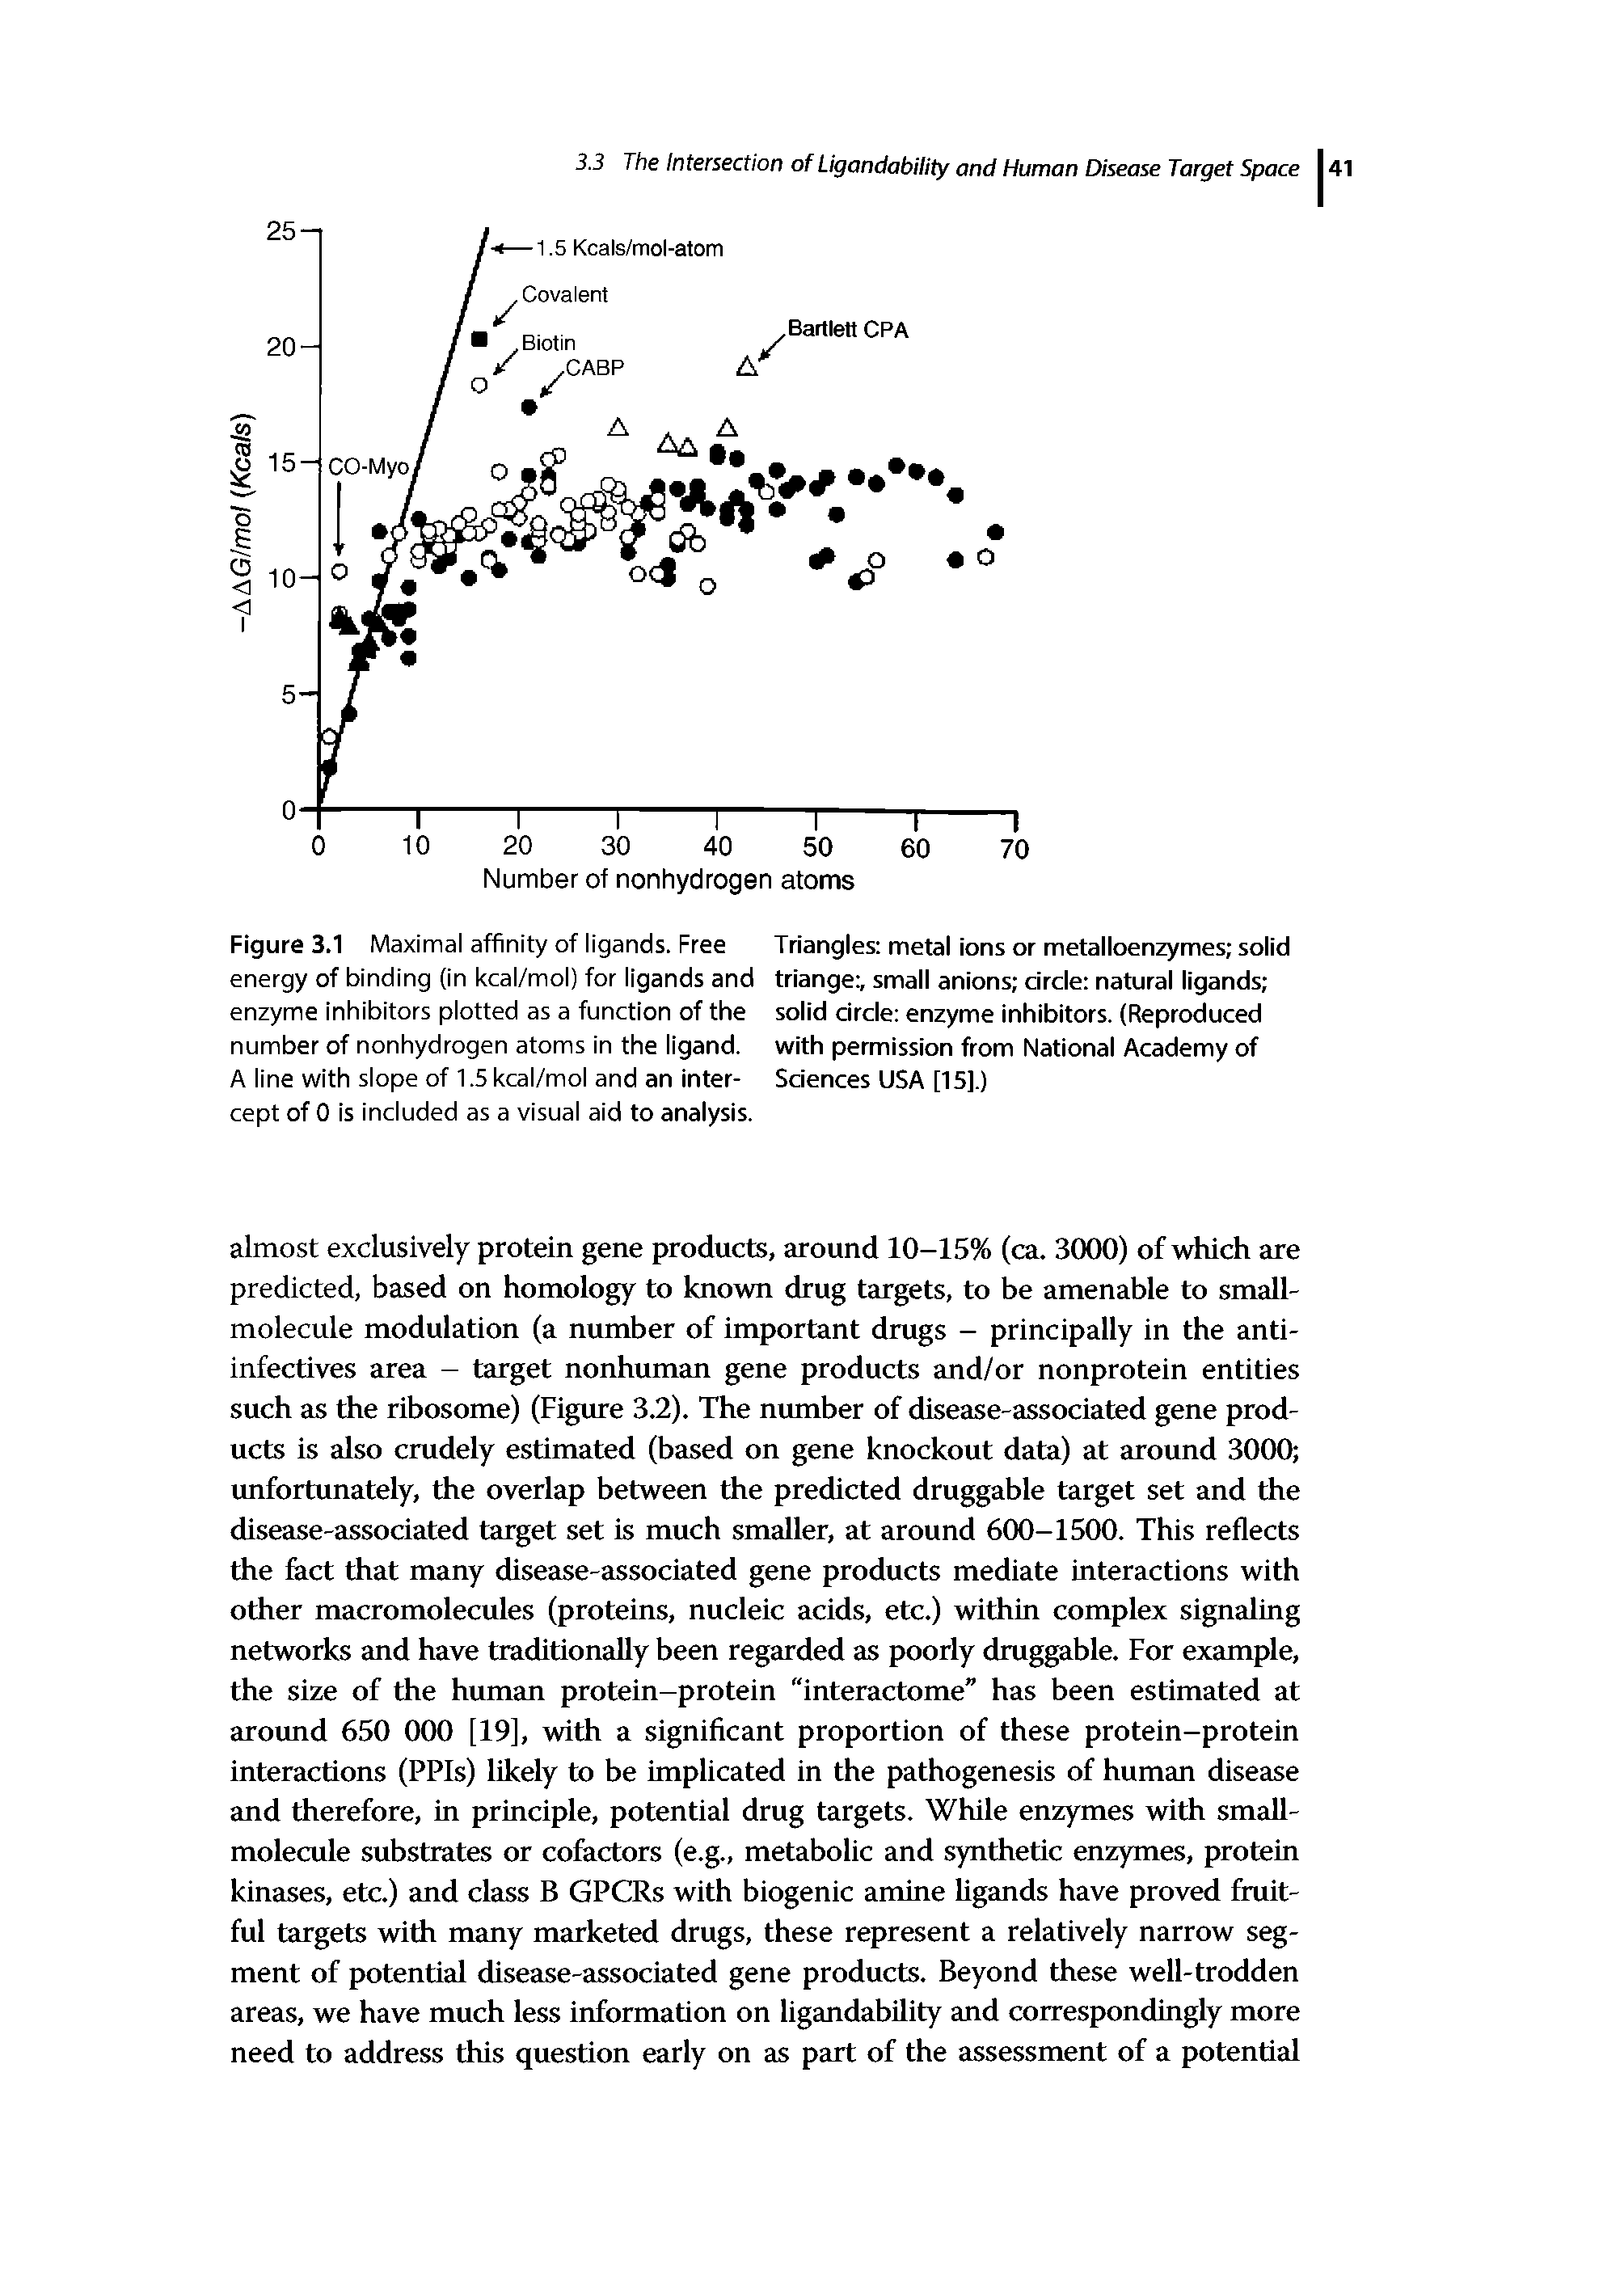 Figure 3.1 Maximal affinity of ligands. Free energy of binding (in kcal/mol) for ligands and enzyme inhibitors plotted as a function of the number of nonhydrogen atoms in the ligand. A line with slope of 1.5 kcal/mol and an intercept of 0 is included as a visual aid to analysis.